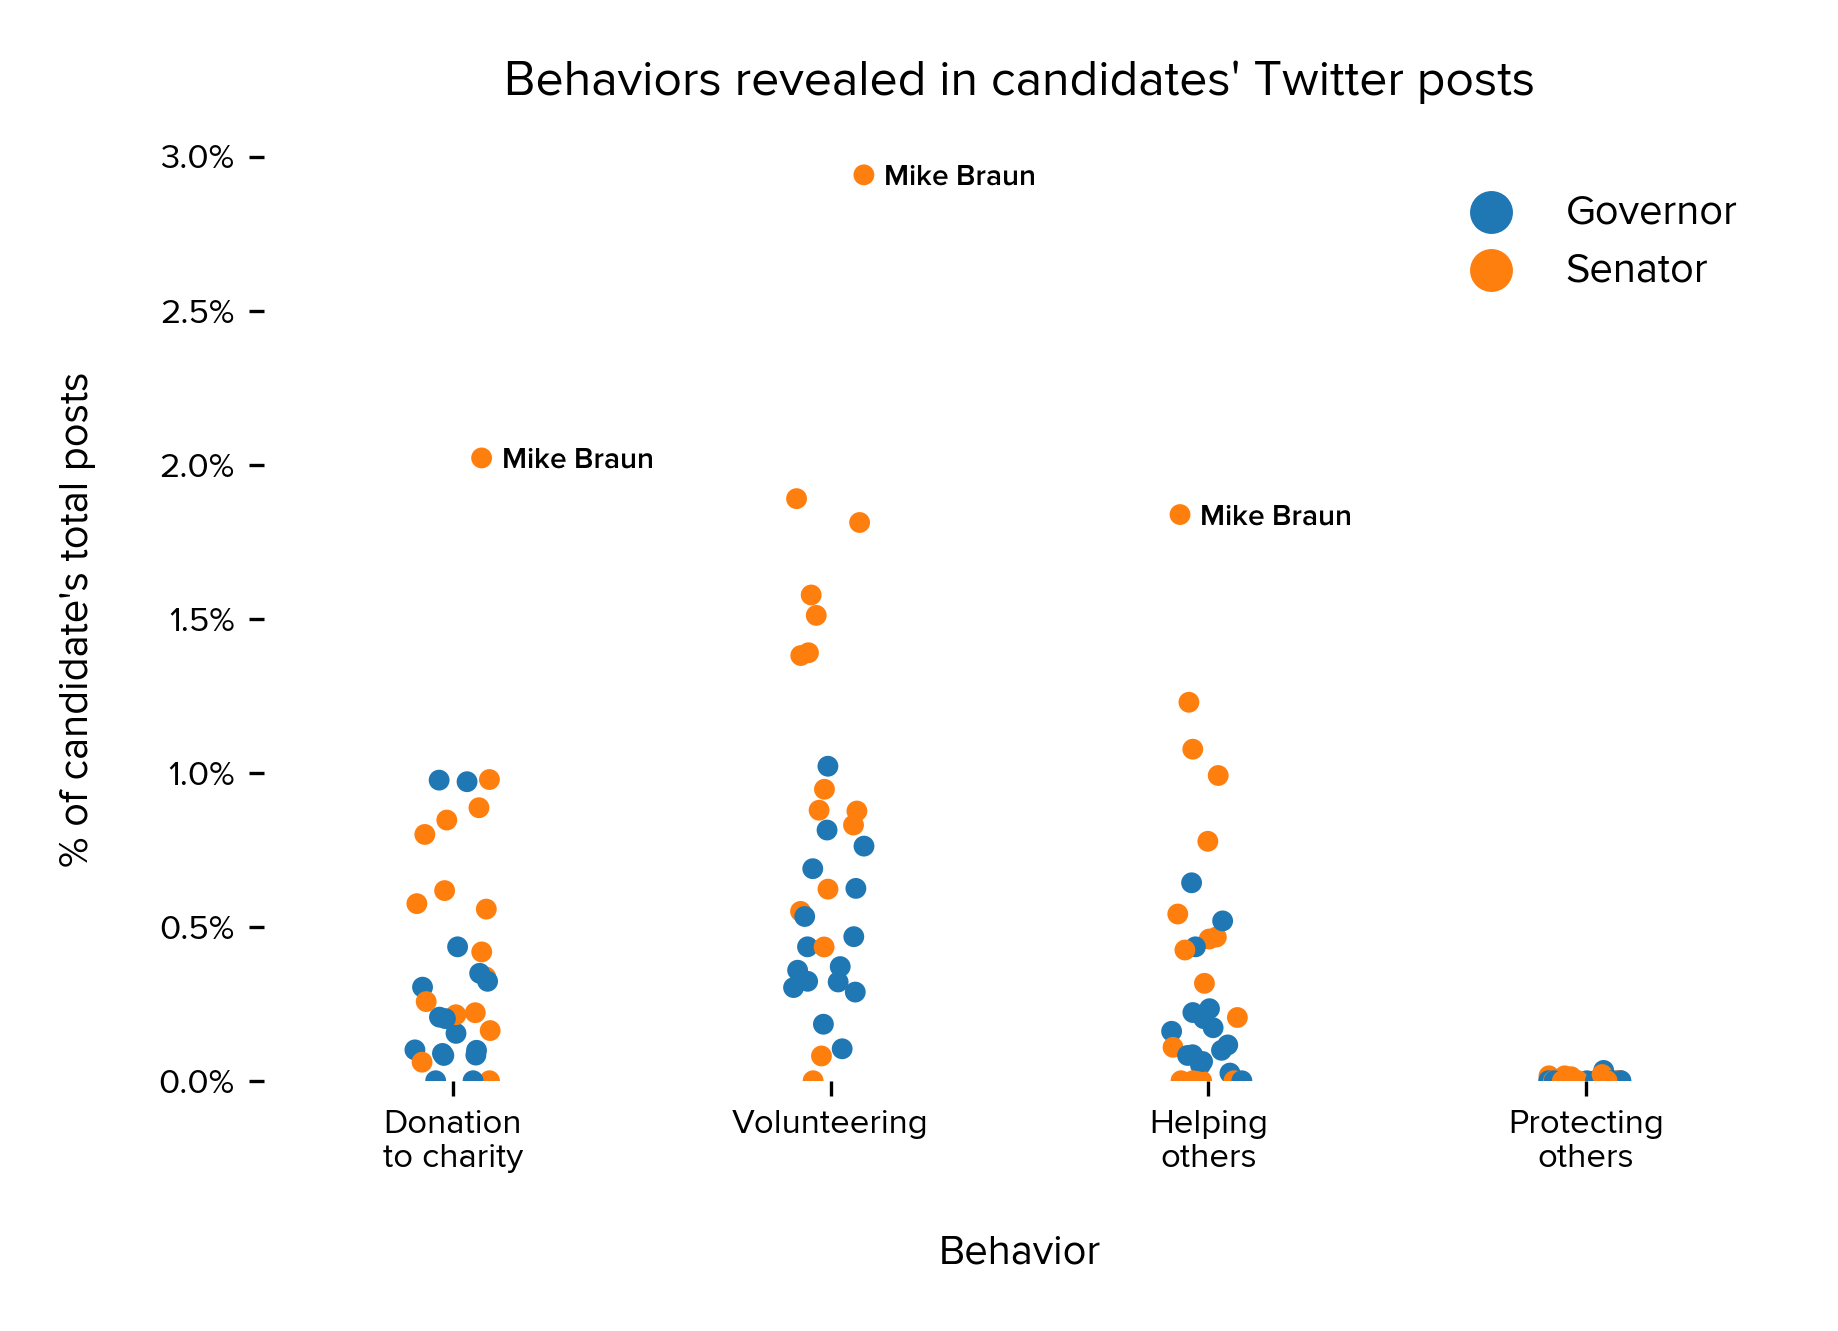  Incidence of specific behaviors as a percentage of each candidate’s total post count, separated by position. Keep in mind there are nuances to each type of behavior. For behaviors like volunteering, our system includes posts in which a candidate volunteers for a cause, but will not include posts referring to recruitment to serve in the armed forces. 